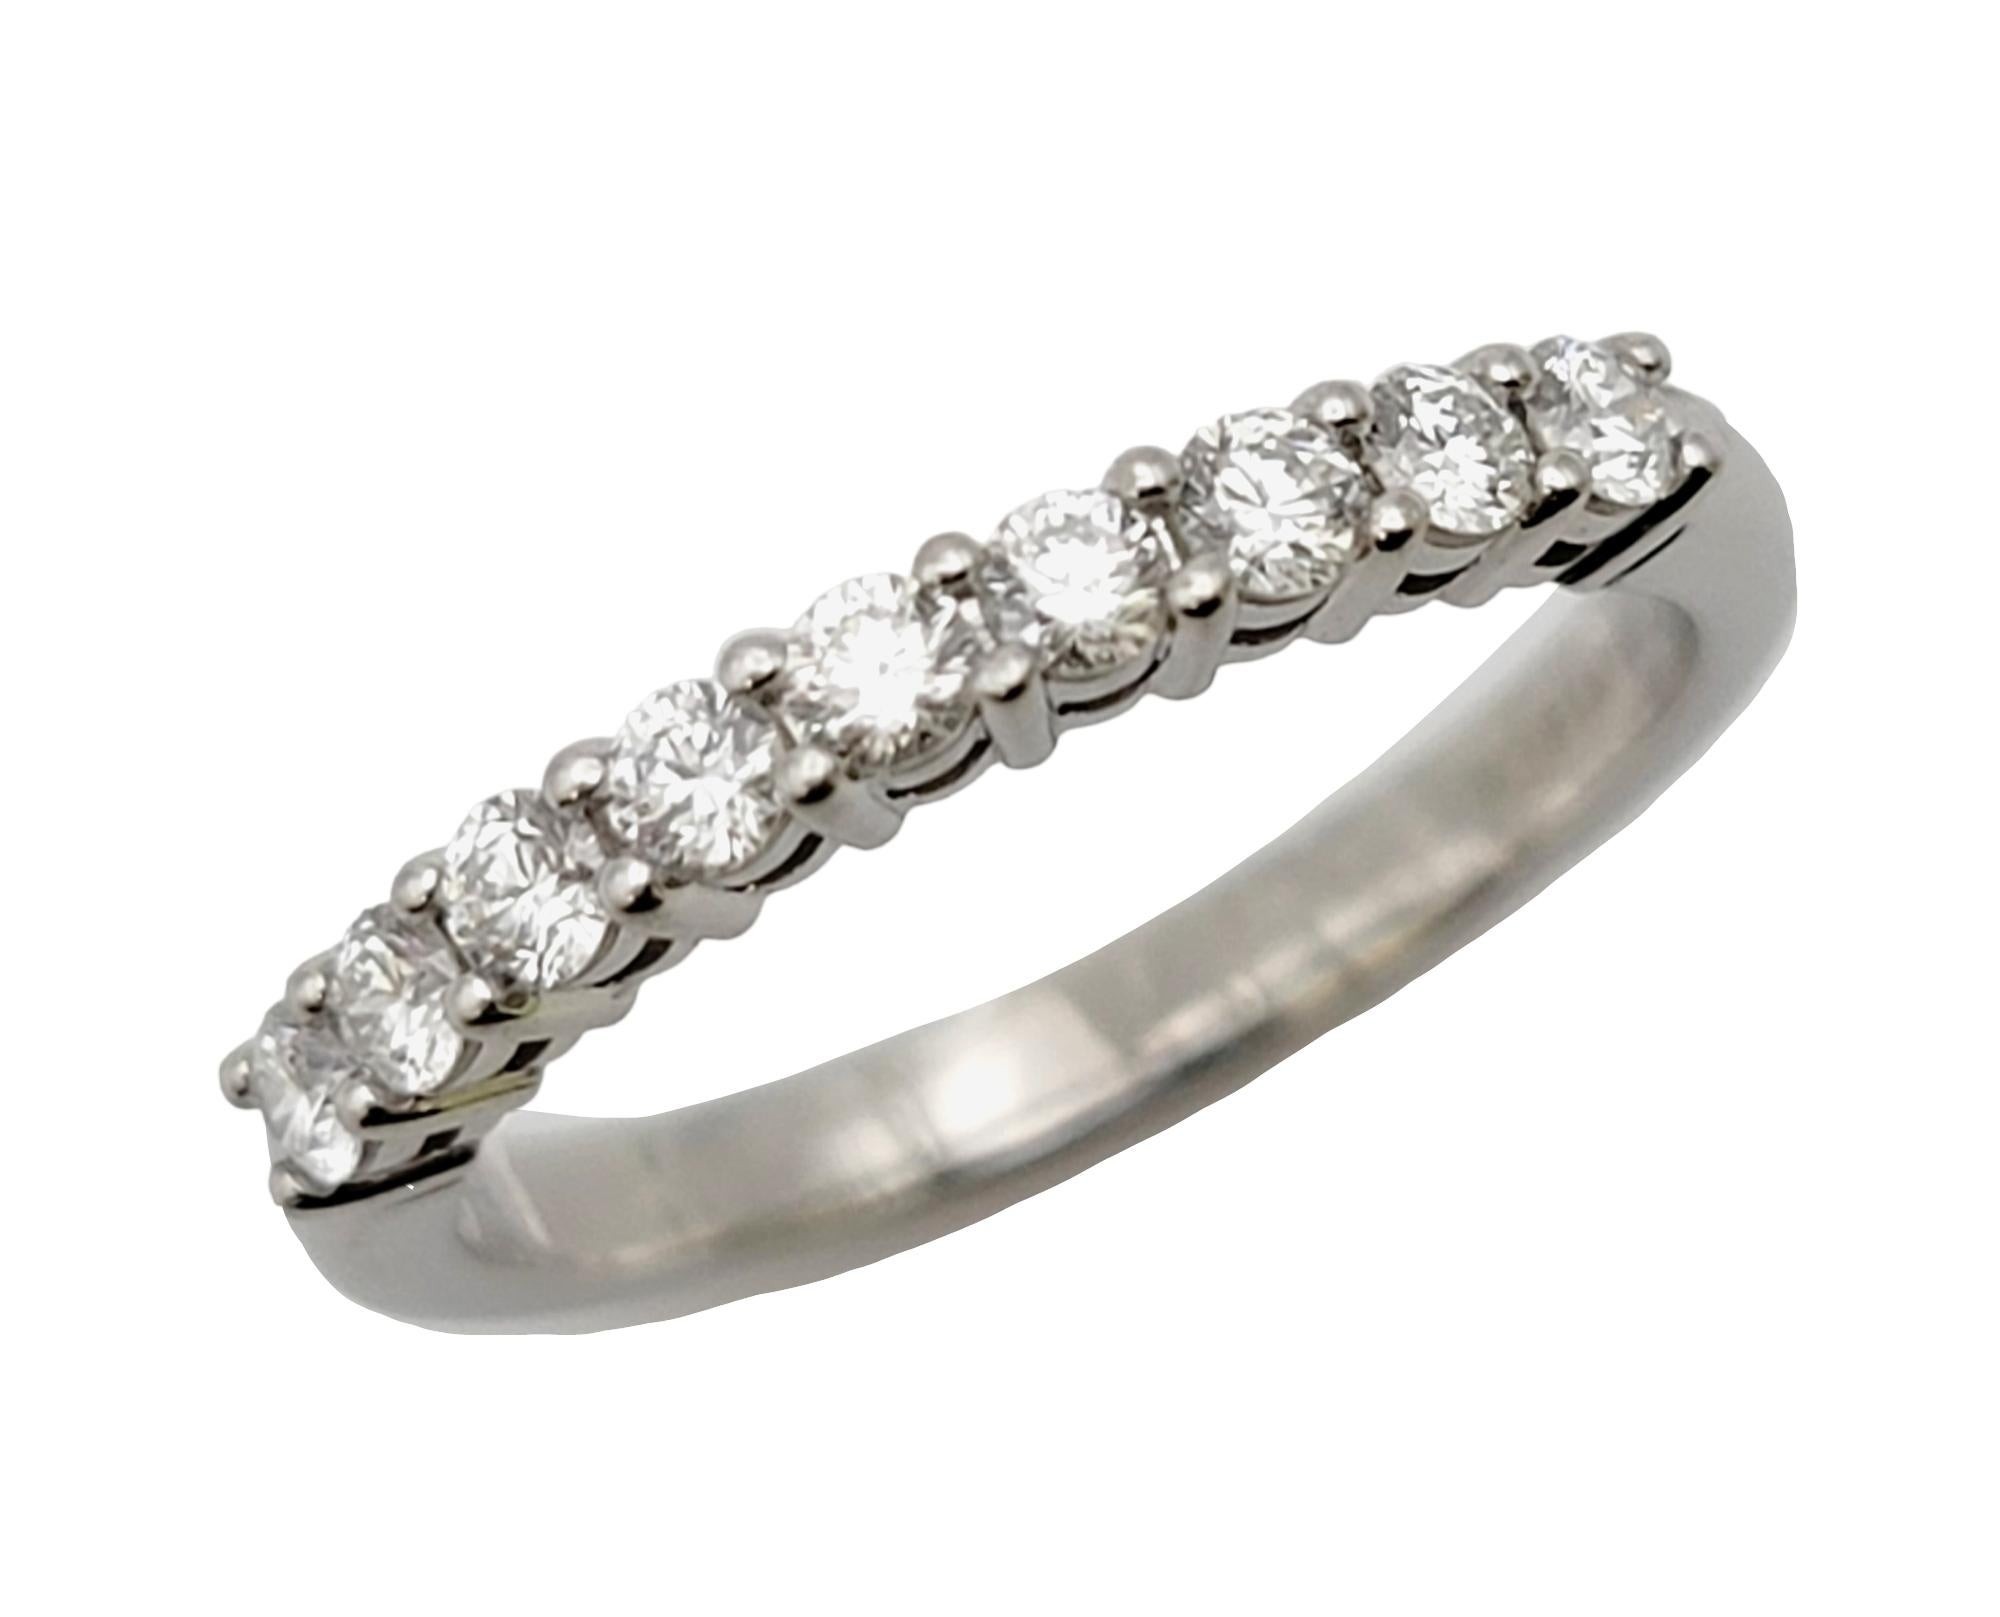 Ring size: 4.5

Stunning Tiffany & Co. diamond semi eternity band ring. Founded in 1837 in New York City, Tiffany & Co. is one of the world's most storied luxury design houses recognized globally for its innovative jewelry design, extraordinary